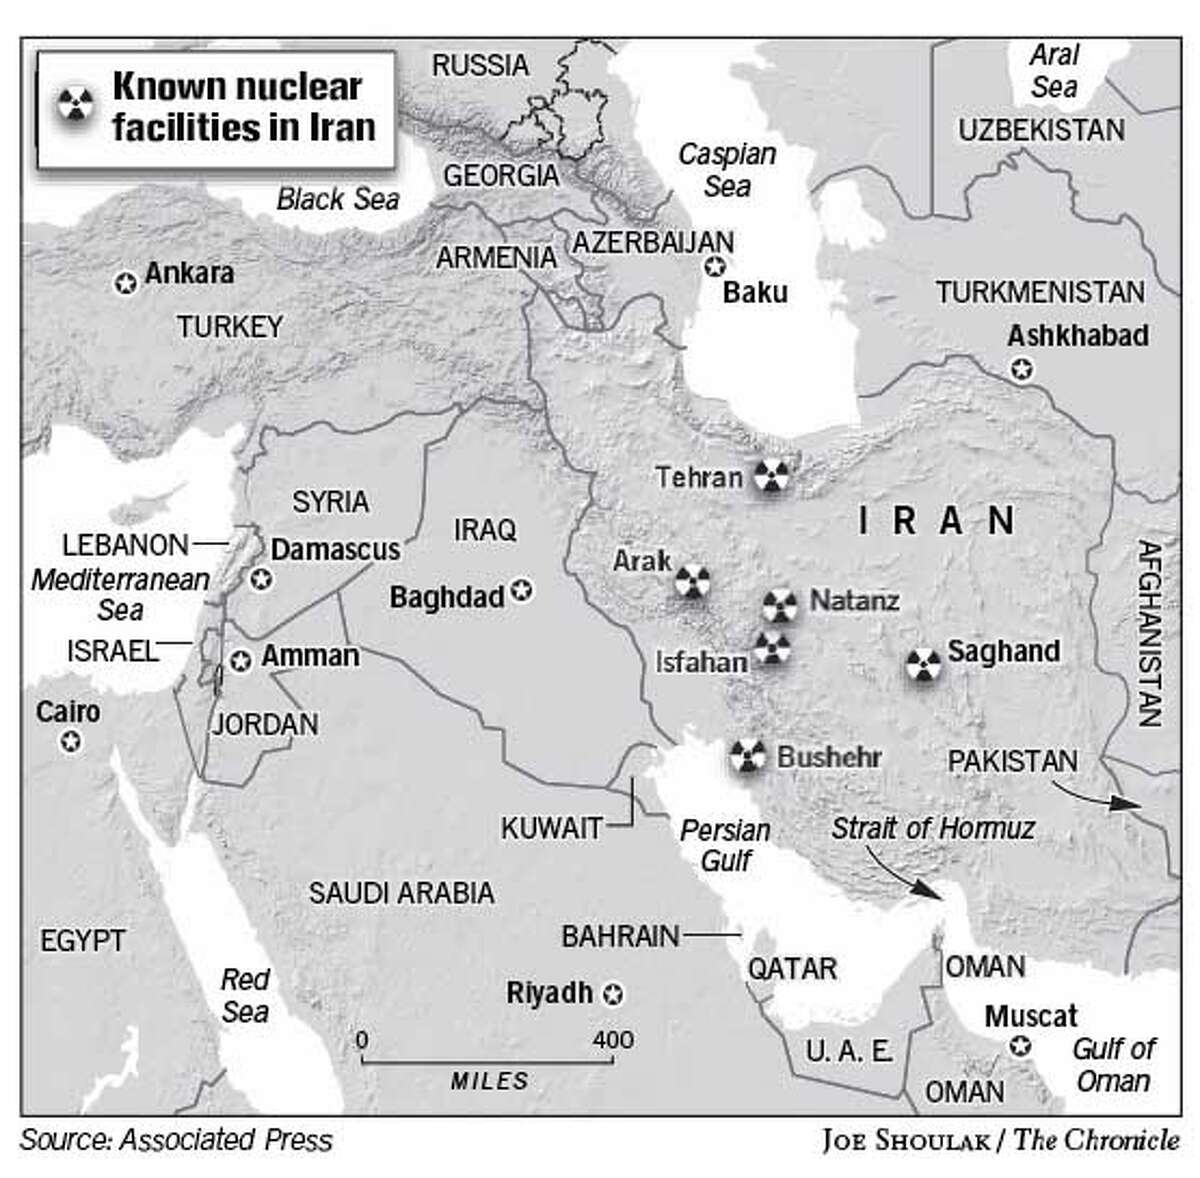 Known Nuclear Facilities in Iran. Chronicle graphic by Joe Shoulak